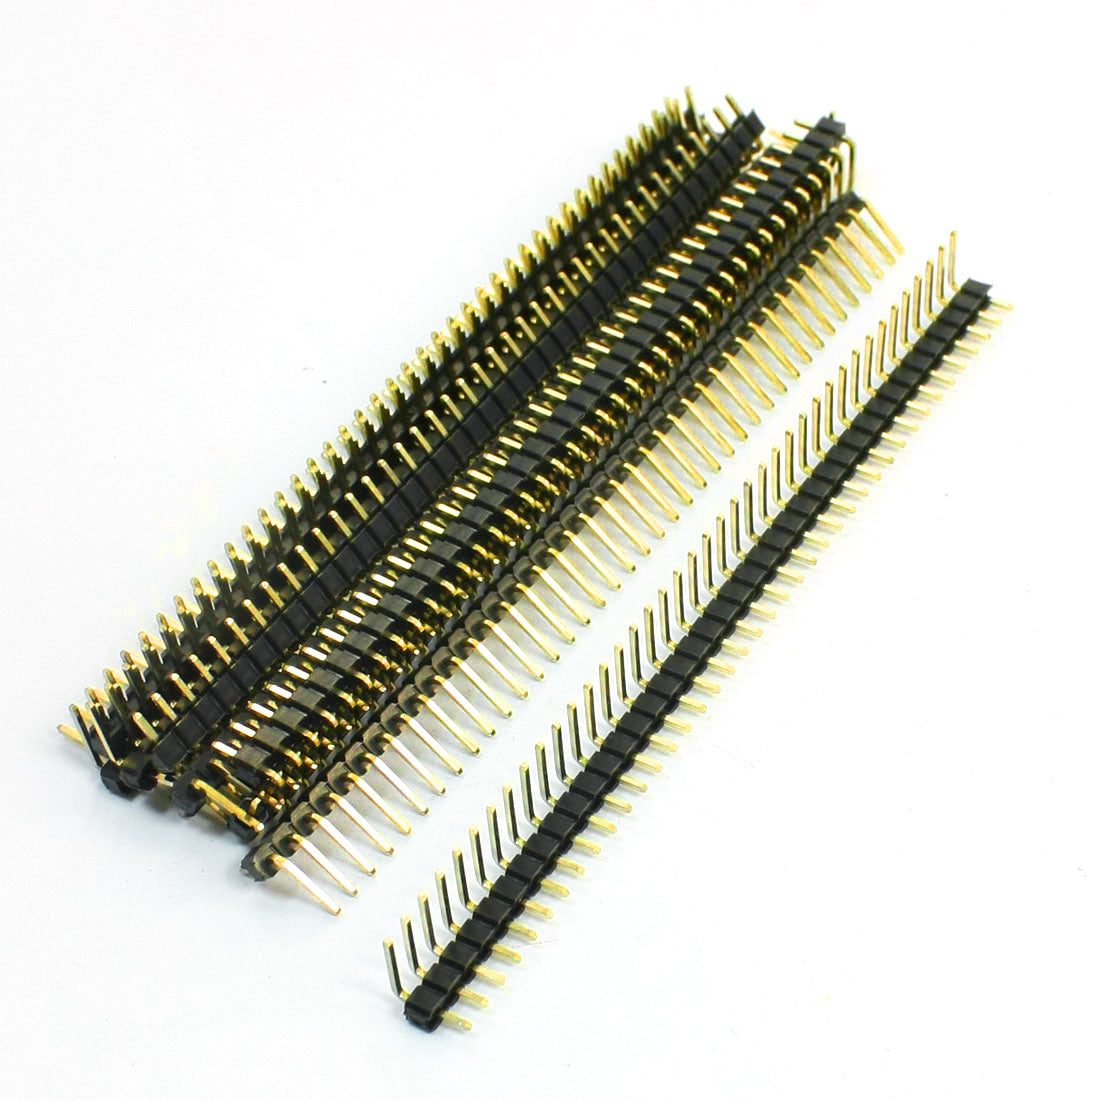 uxcell Uxcell 10 Pcs 2.54mm Spacing 40P Right Angle Male PCB Pin Header Gold Tone